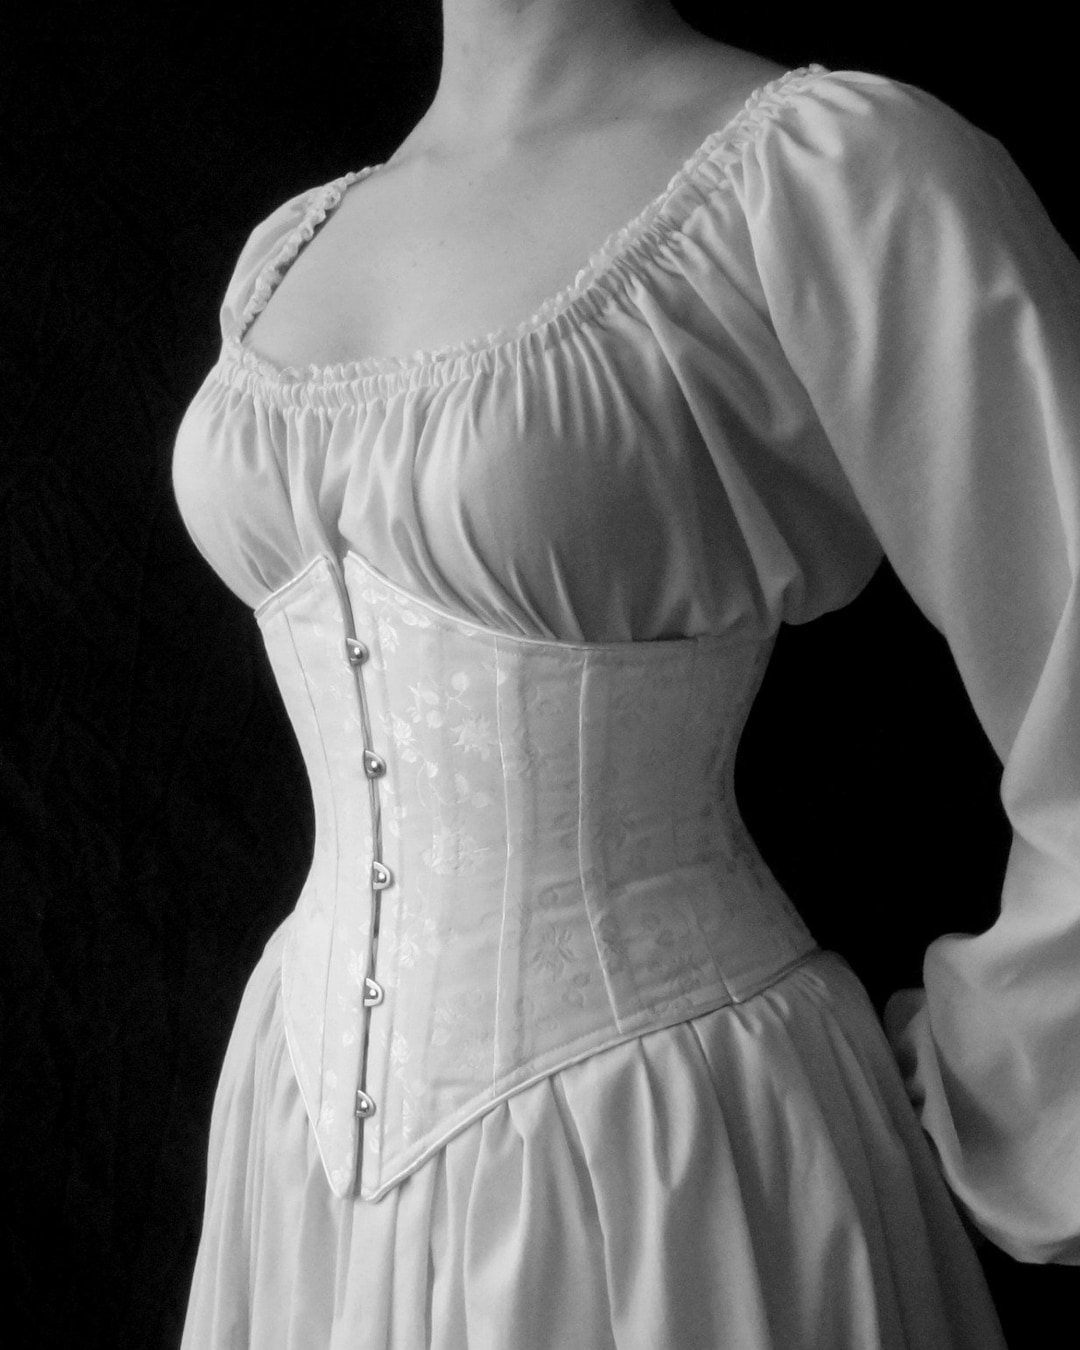 Underbust Waist Cinch Corset Victorian C. 1900 Lilly, Cotton Coutil Waspie  Small Through 2XL, Custom Sized, Plus Size Full Figured Hourglass -   Canada